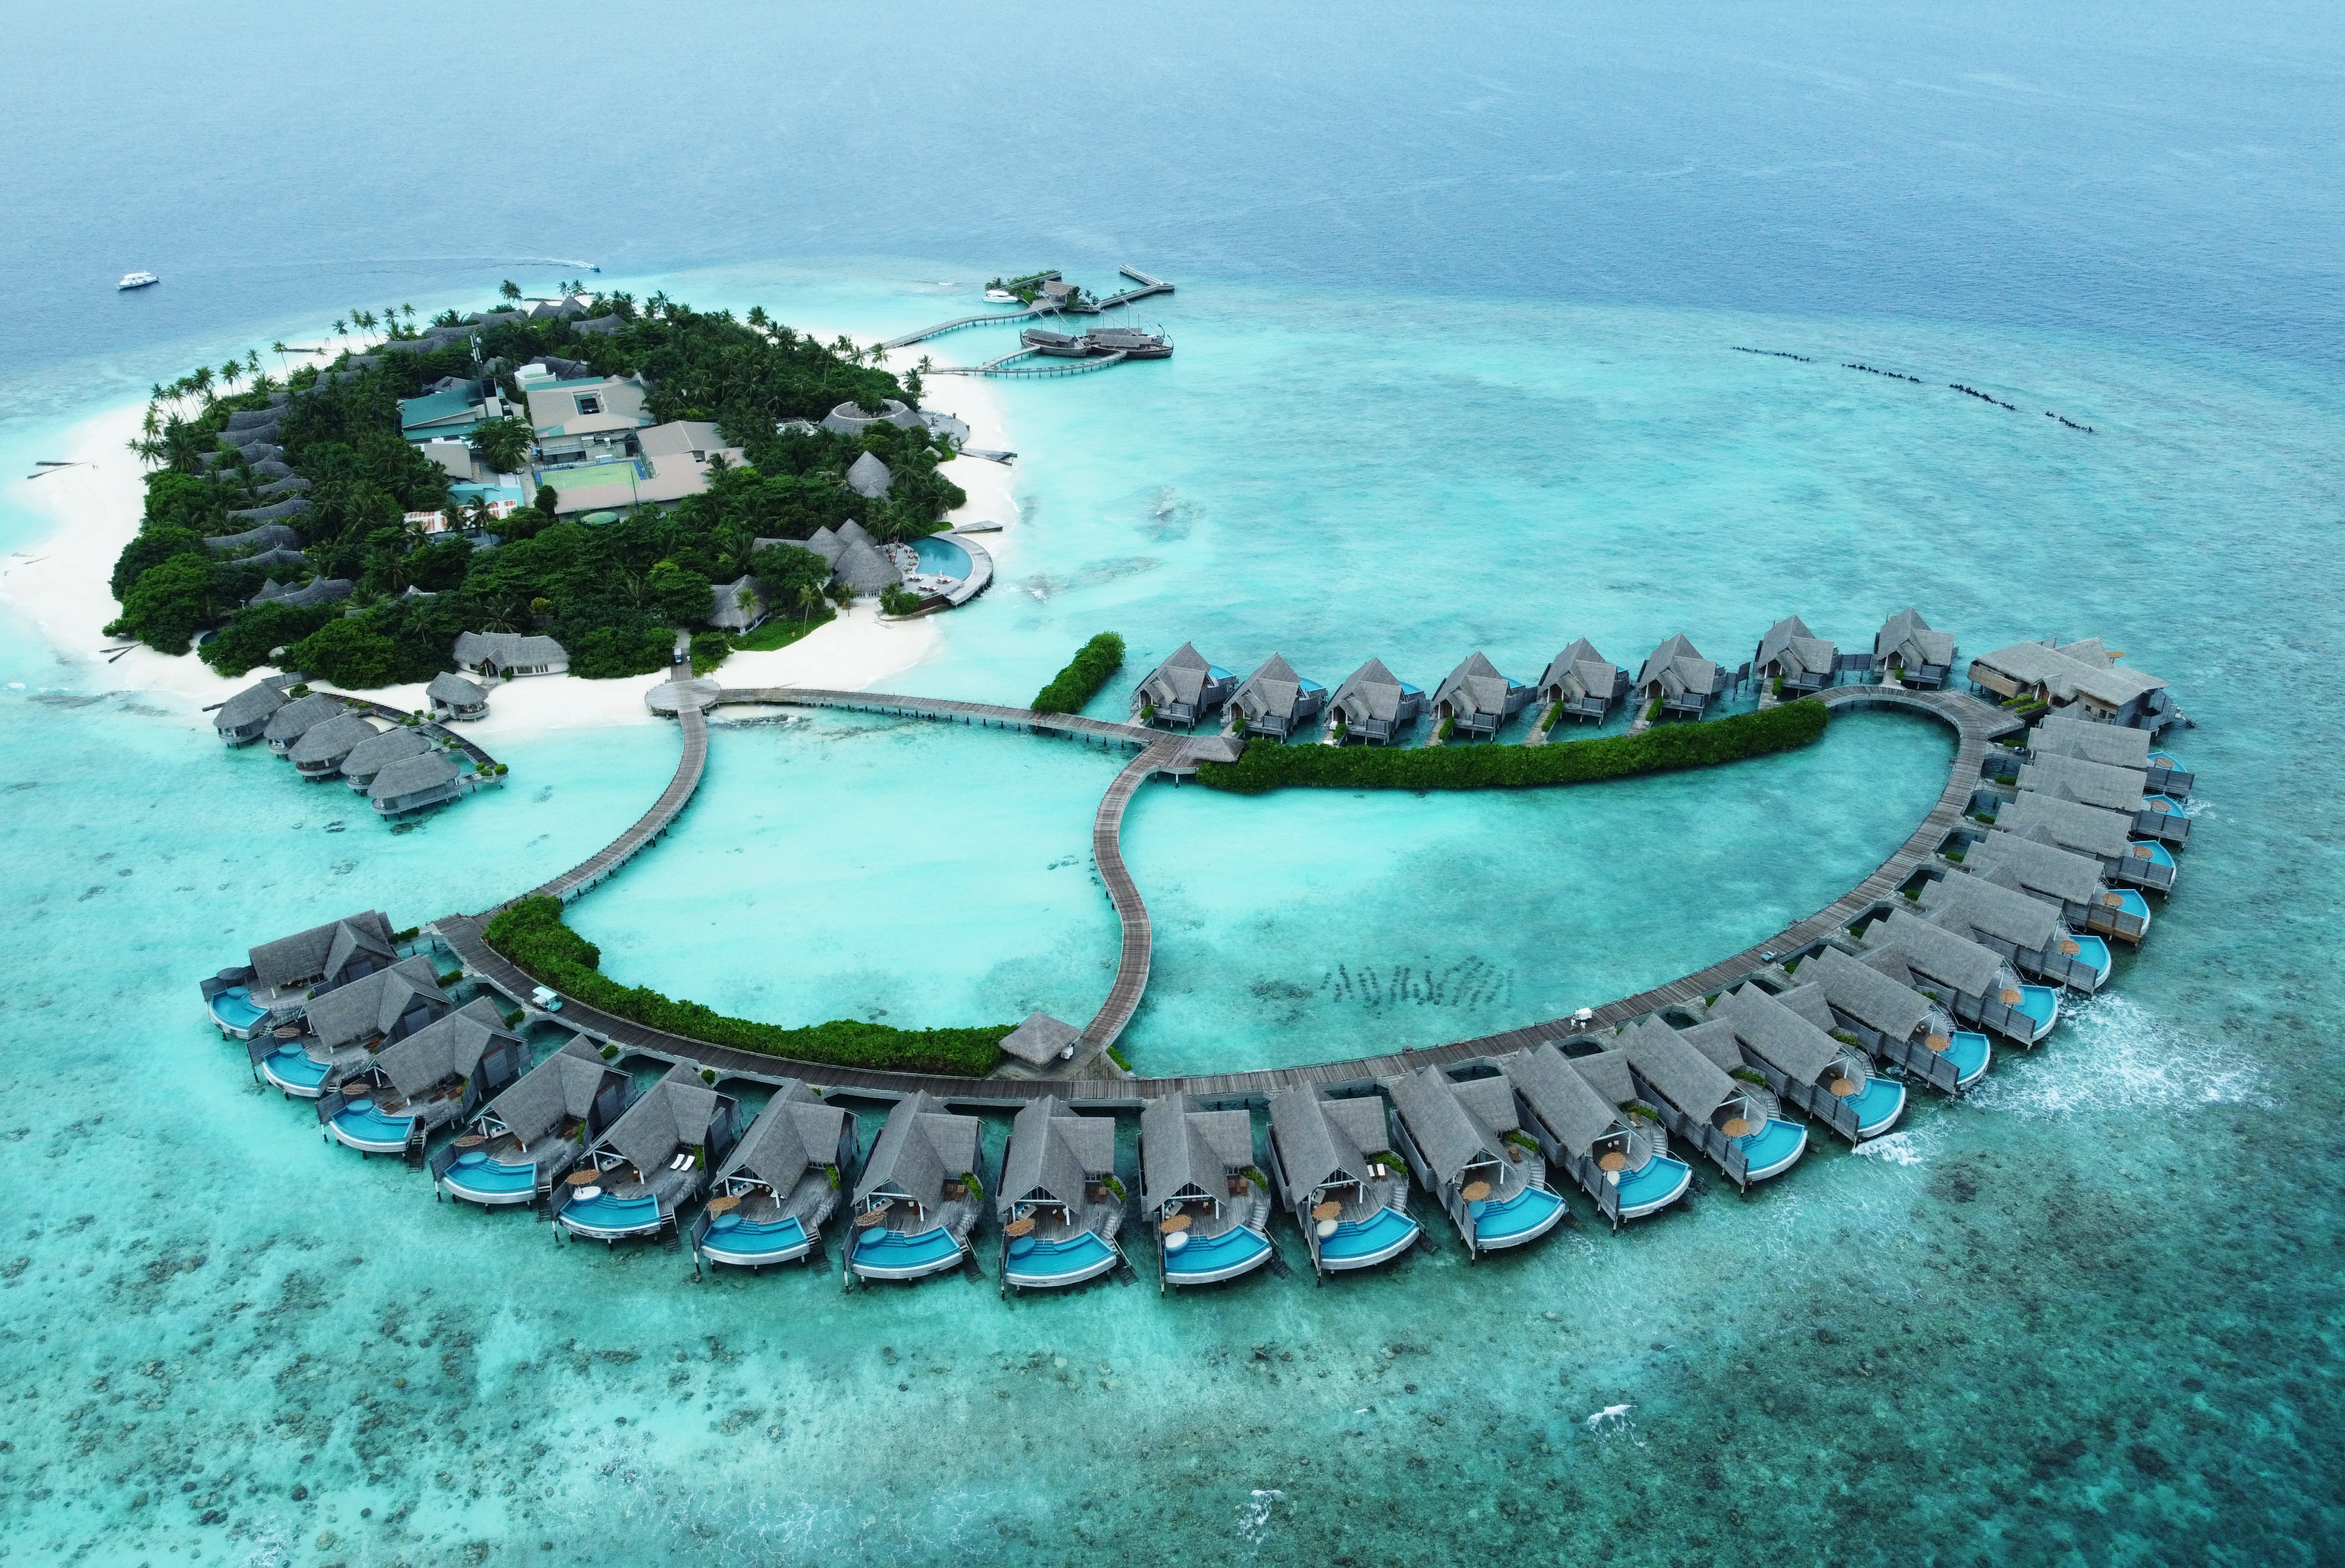 Milaidhoo island from above, with water villas in the foreground (Owen Humphries/PA) 